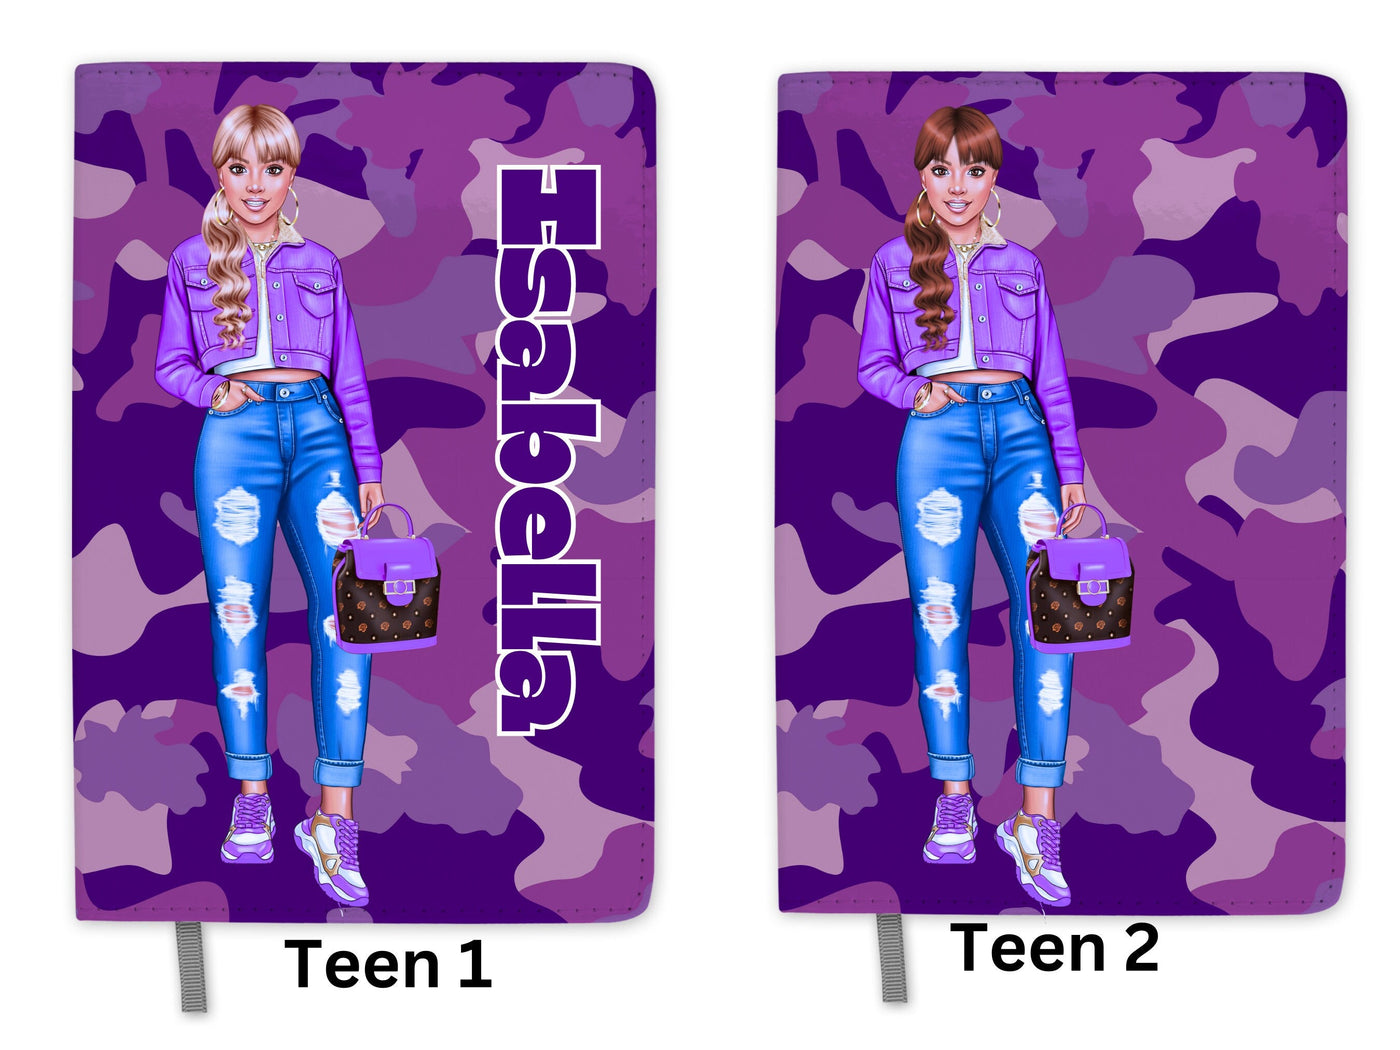 Personalized Purple Journal for Teenage Girls Who Love Camouflage Custom Gift for Teen Girls